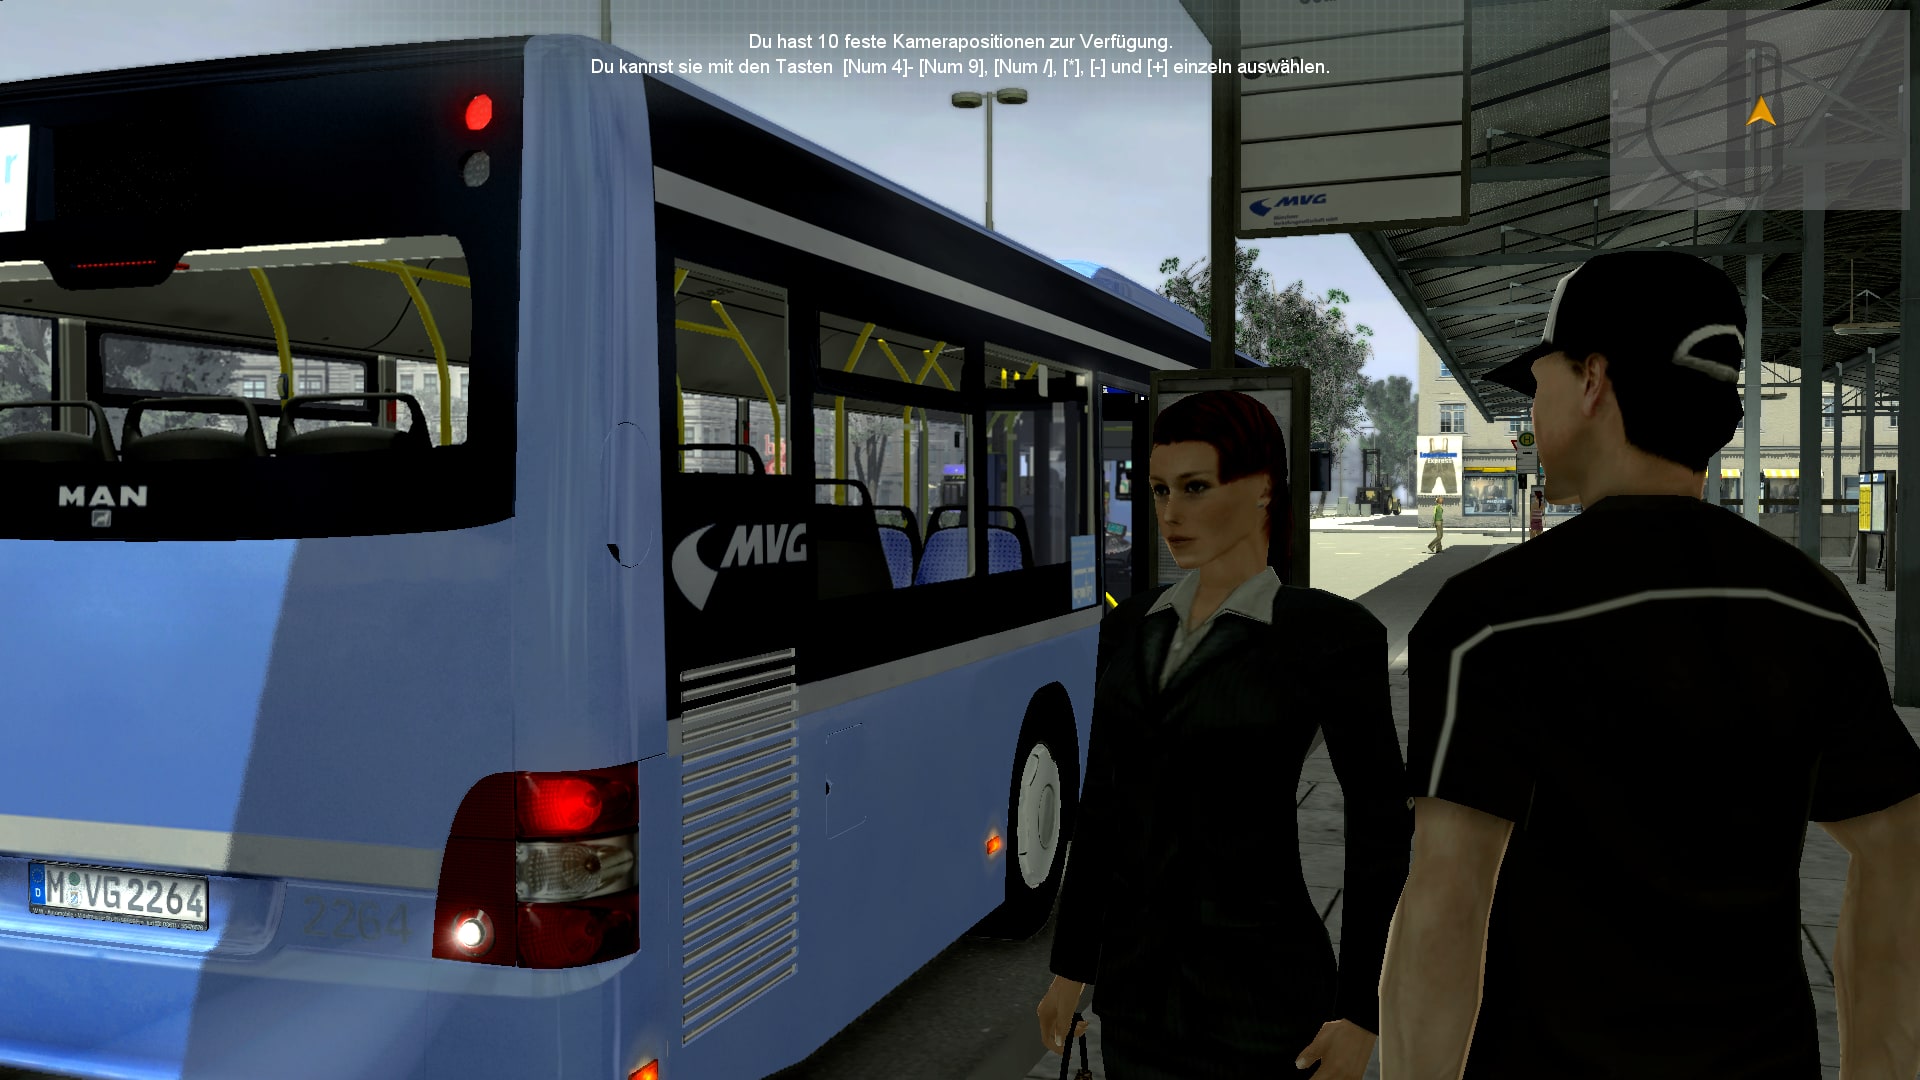 how to download bus simulator 2008